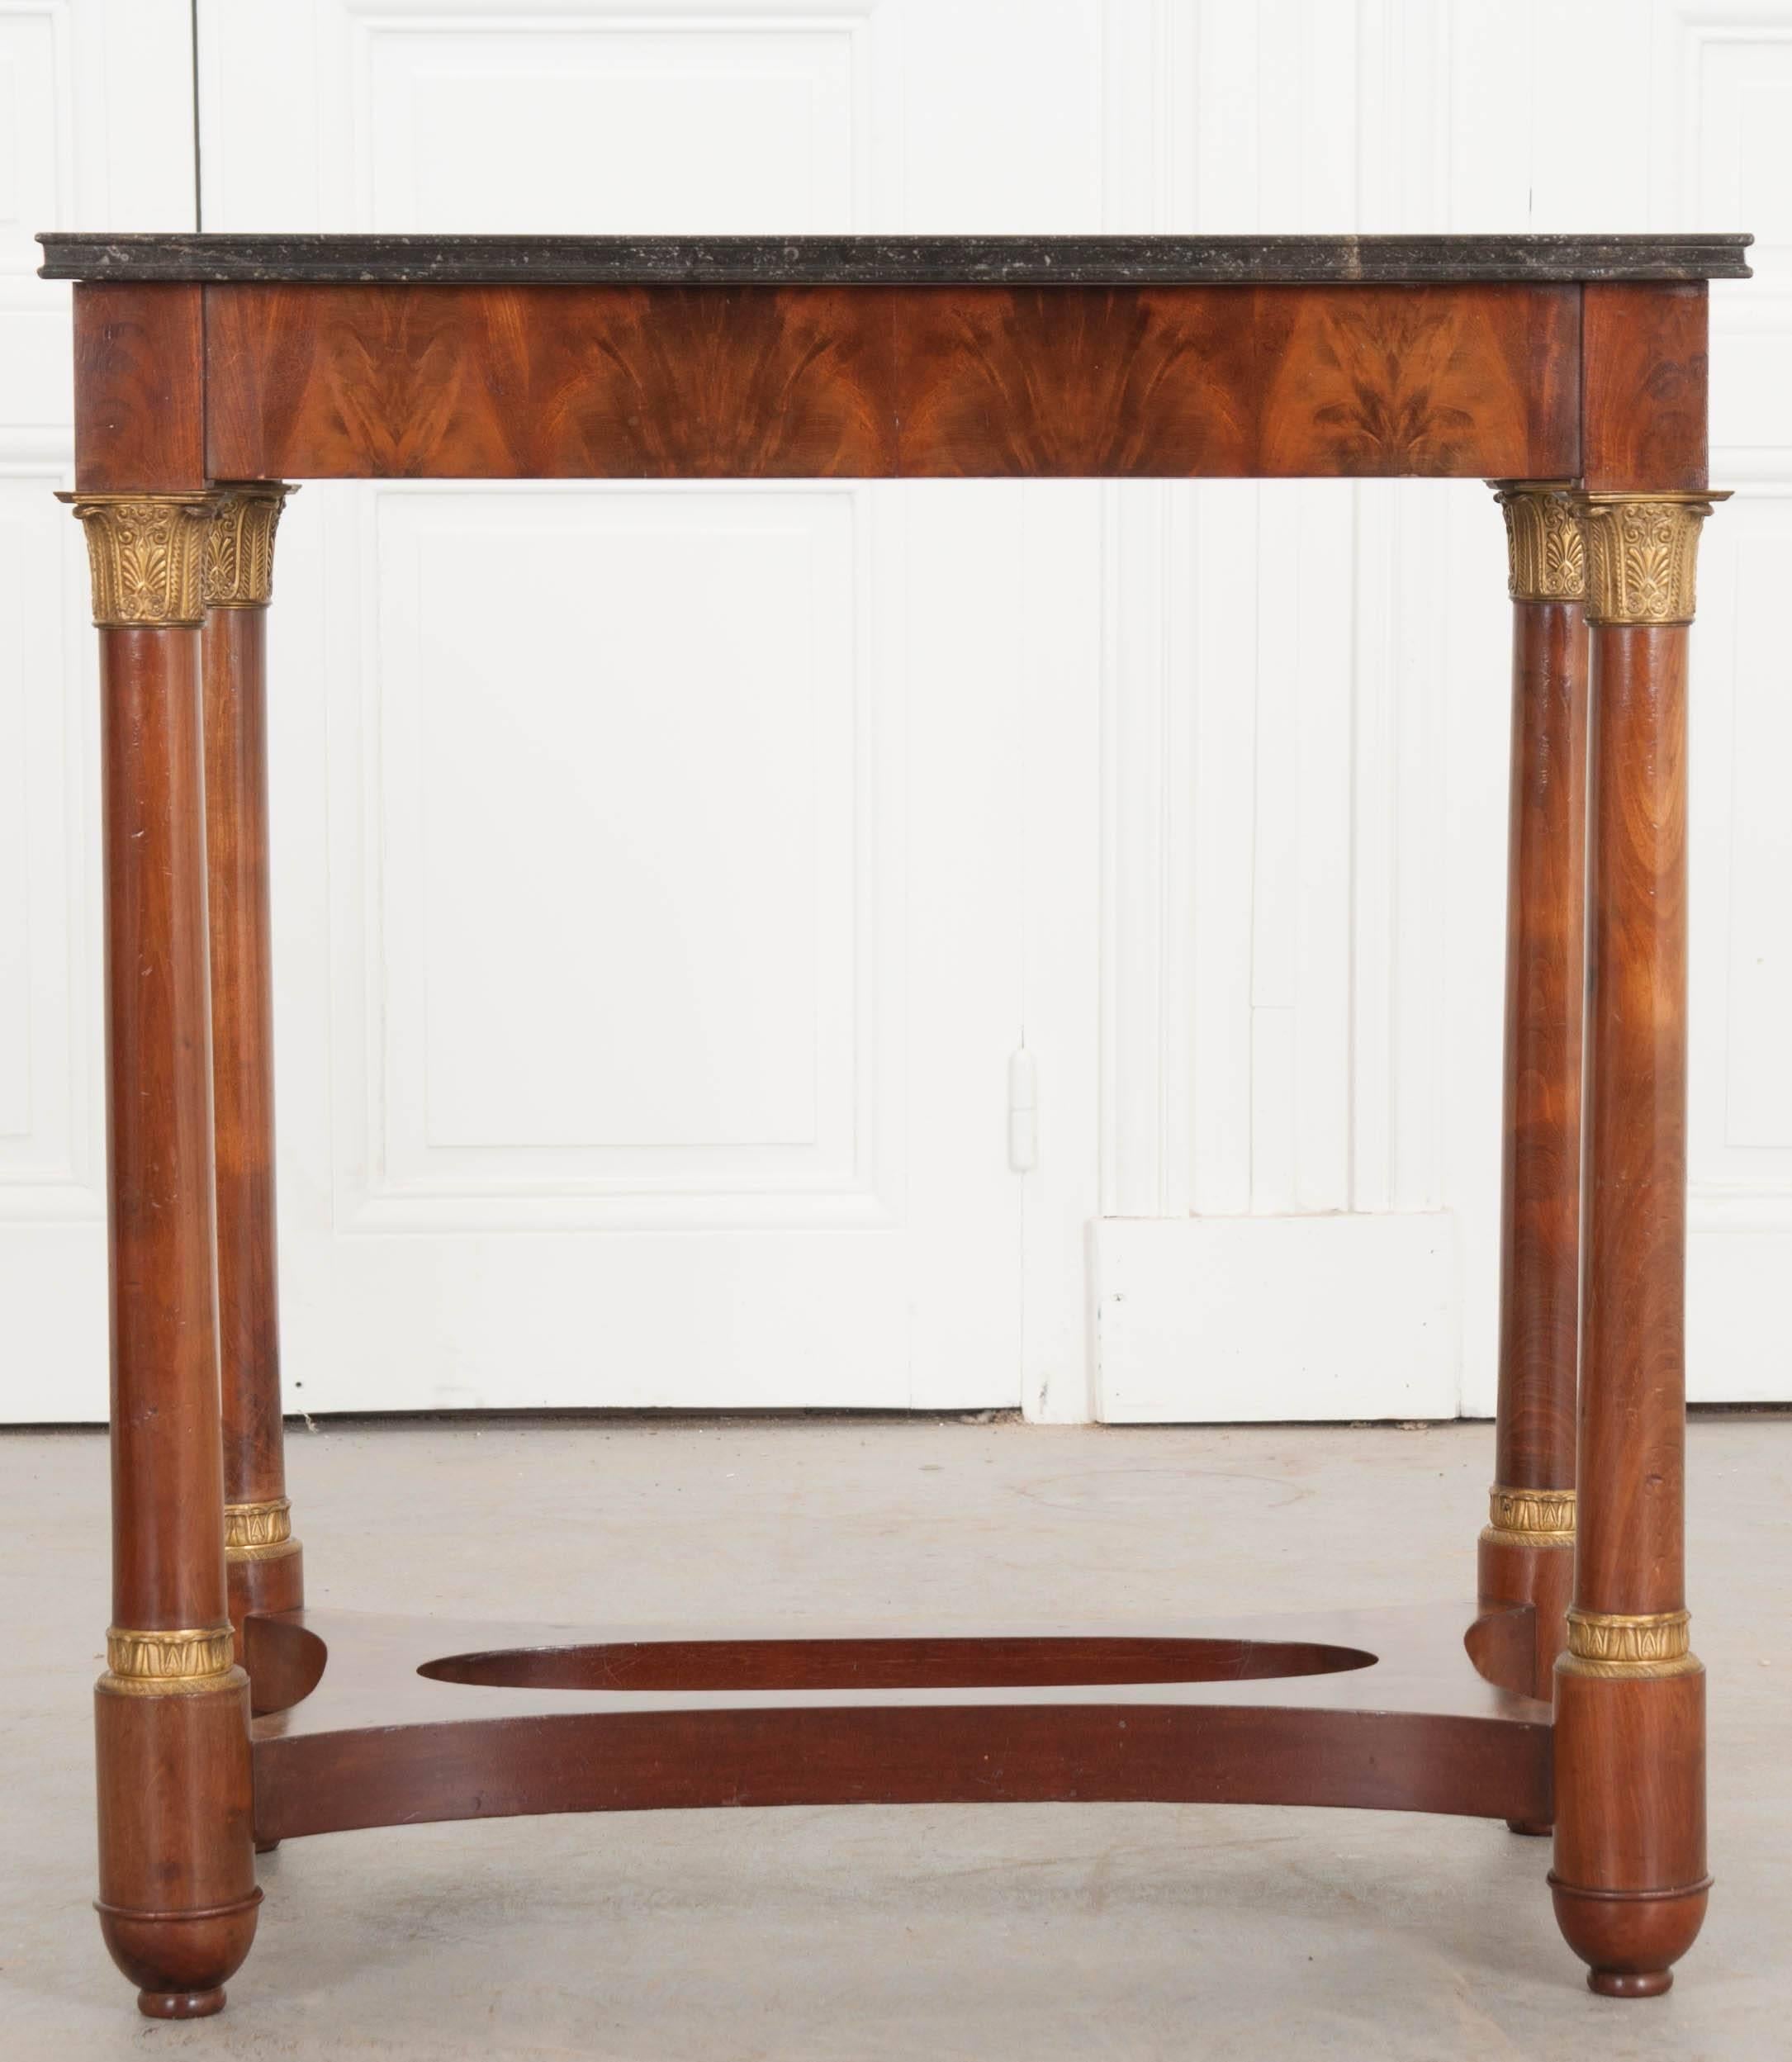 A fantastic mahogany Empire style table from France. Made at the beginning of the 20th century, this excellent little table has a beautiful black marble top that contains tiny fossilized creatures throughout. The marble is in terrific antique